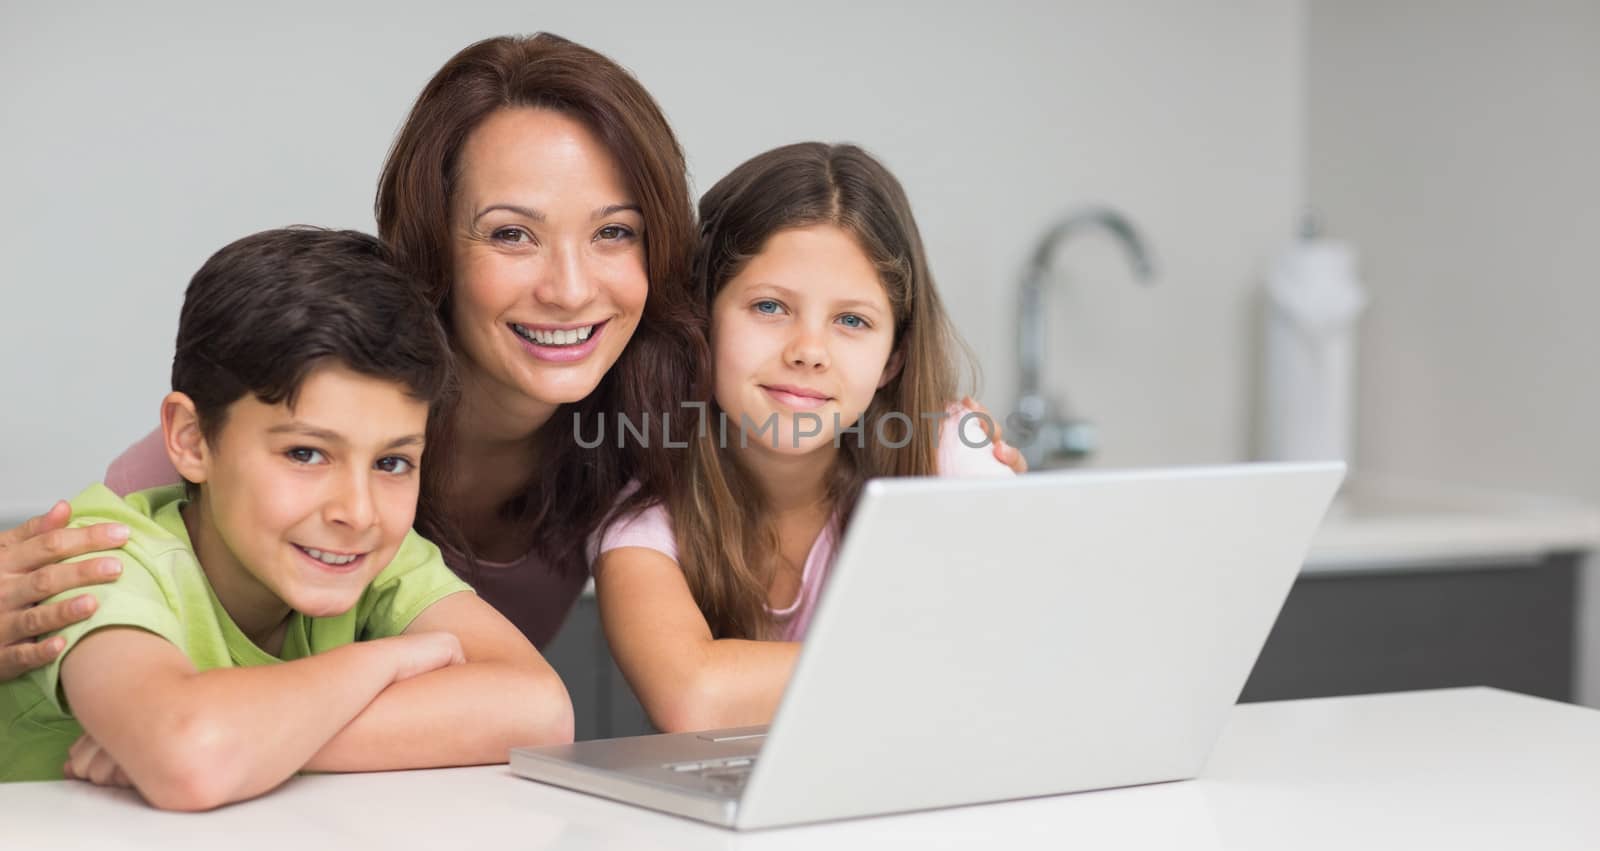 Portrait of a smiling mother with young kids using laptop in the kitchen at home